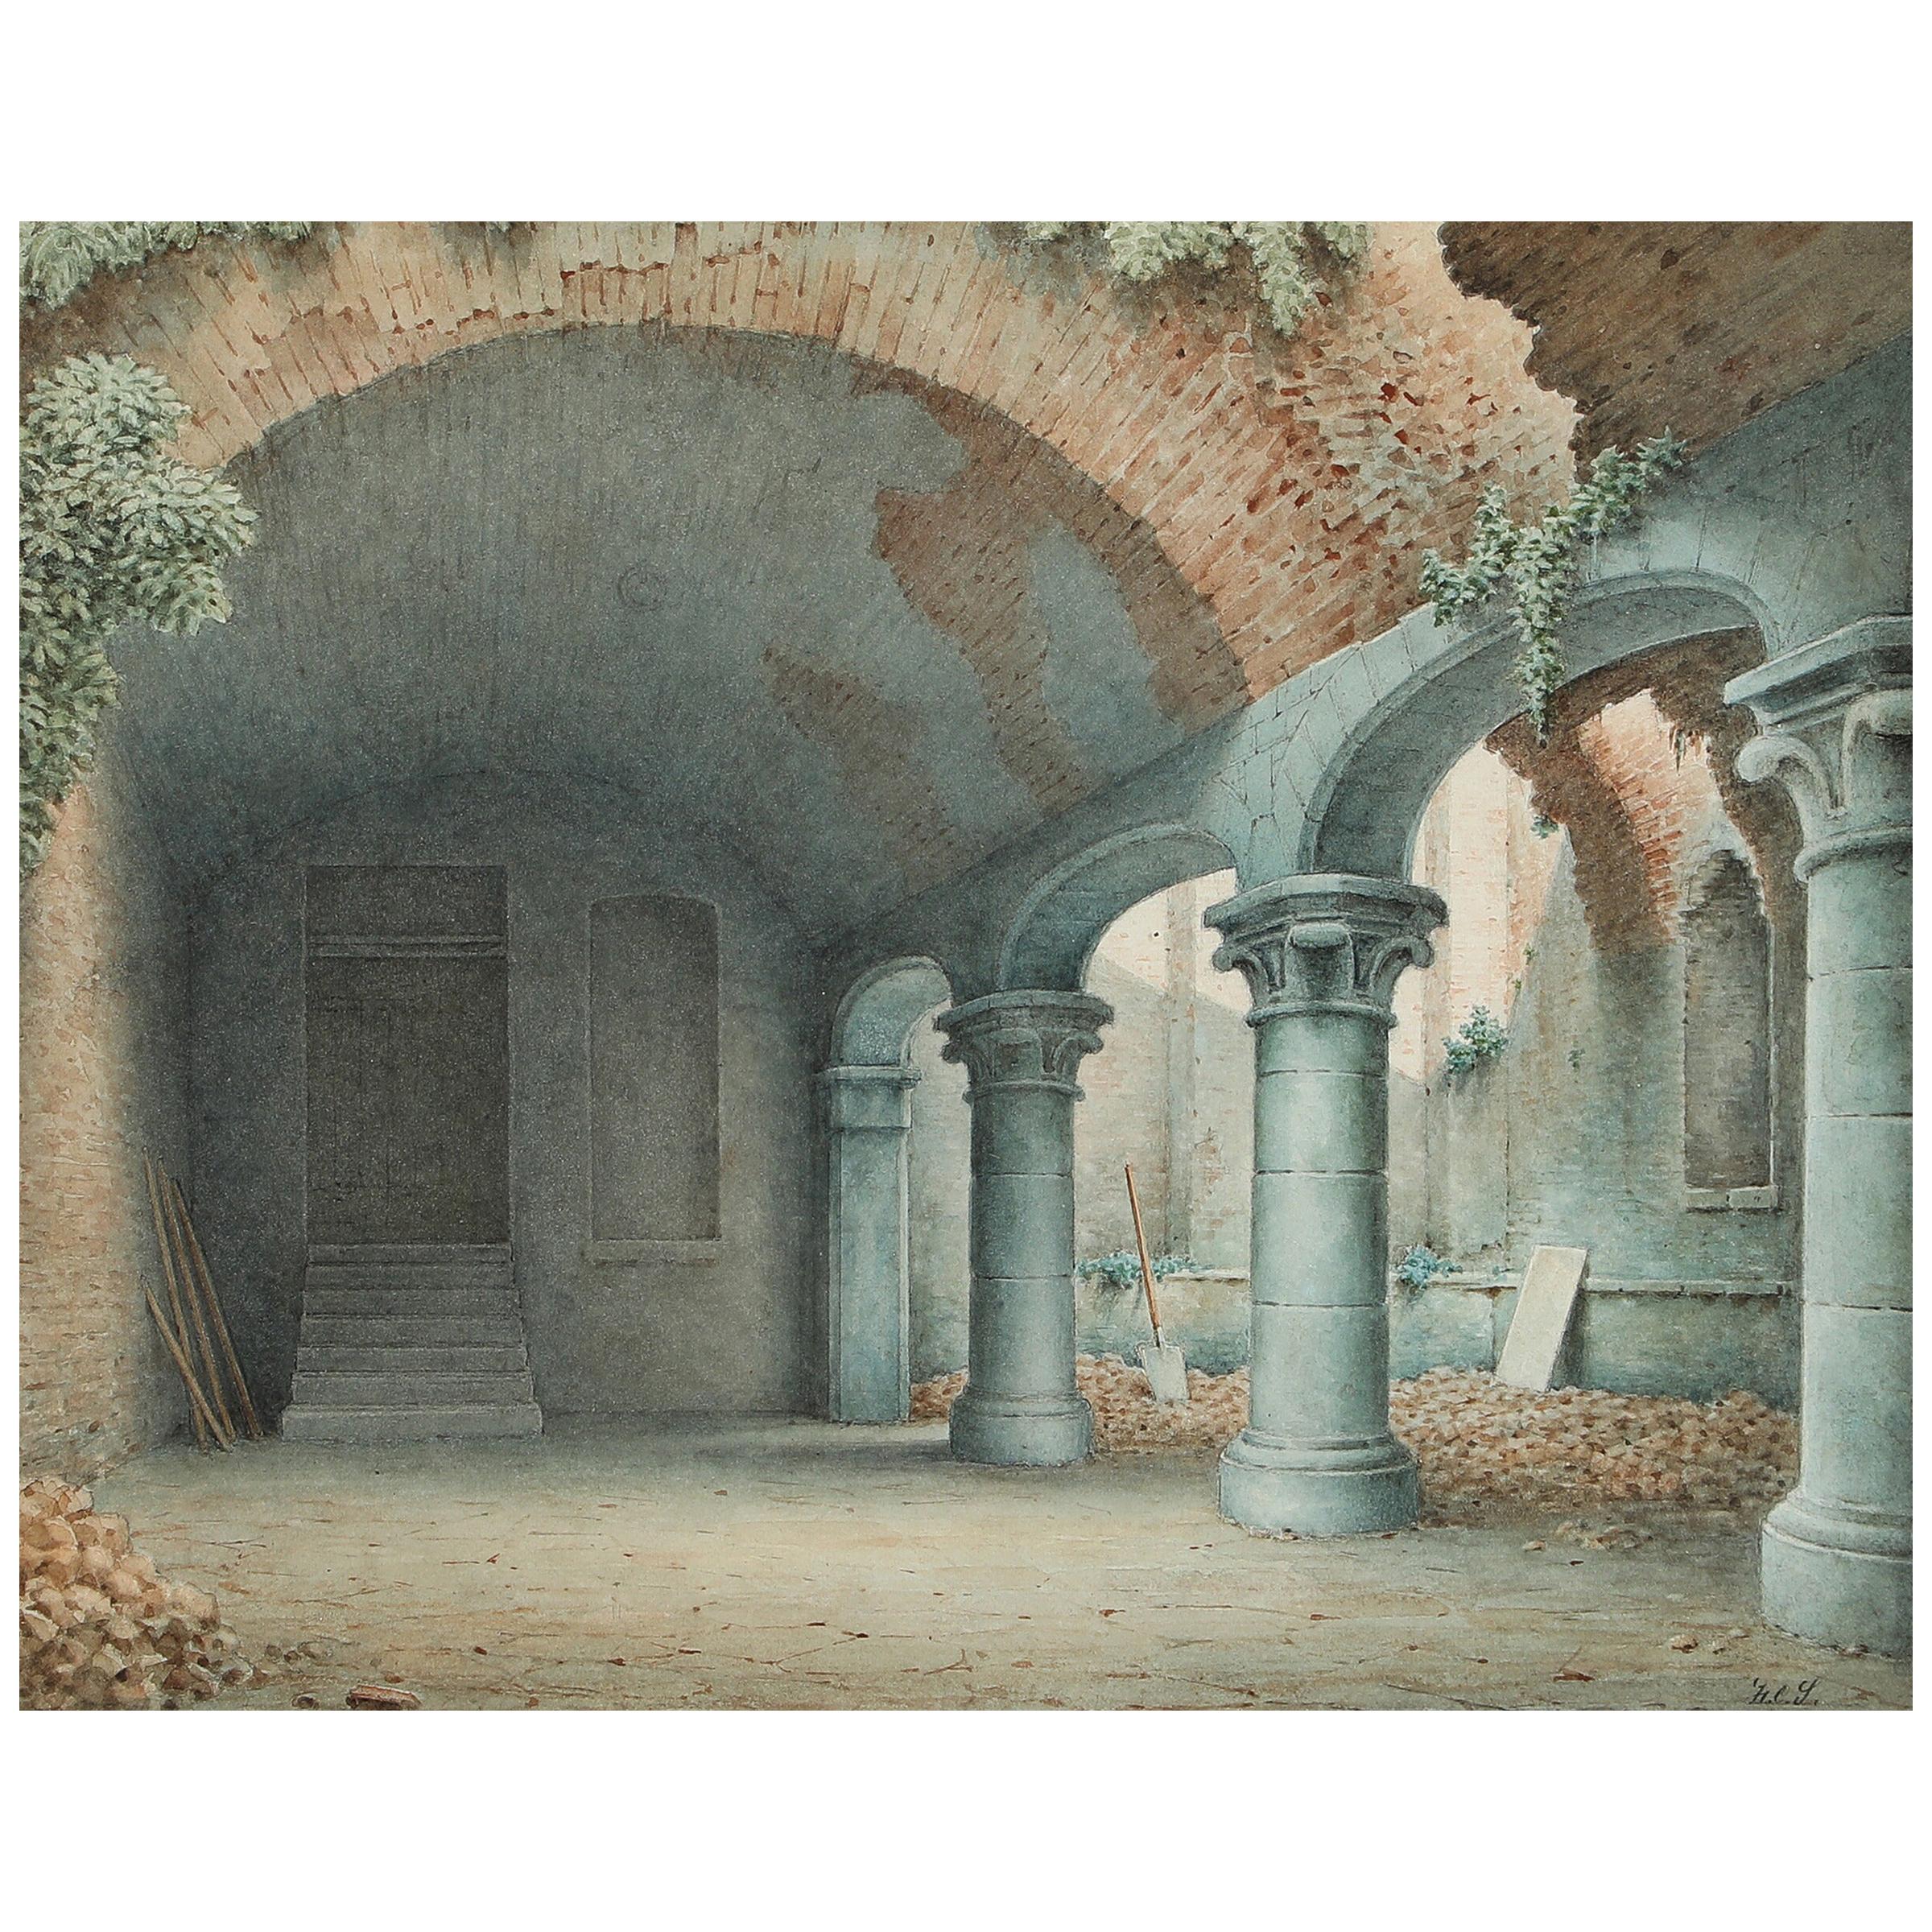 Ruins of a Monastery Courtyard, Signed and Dated by Harald Conrad Stilling, 1865